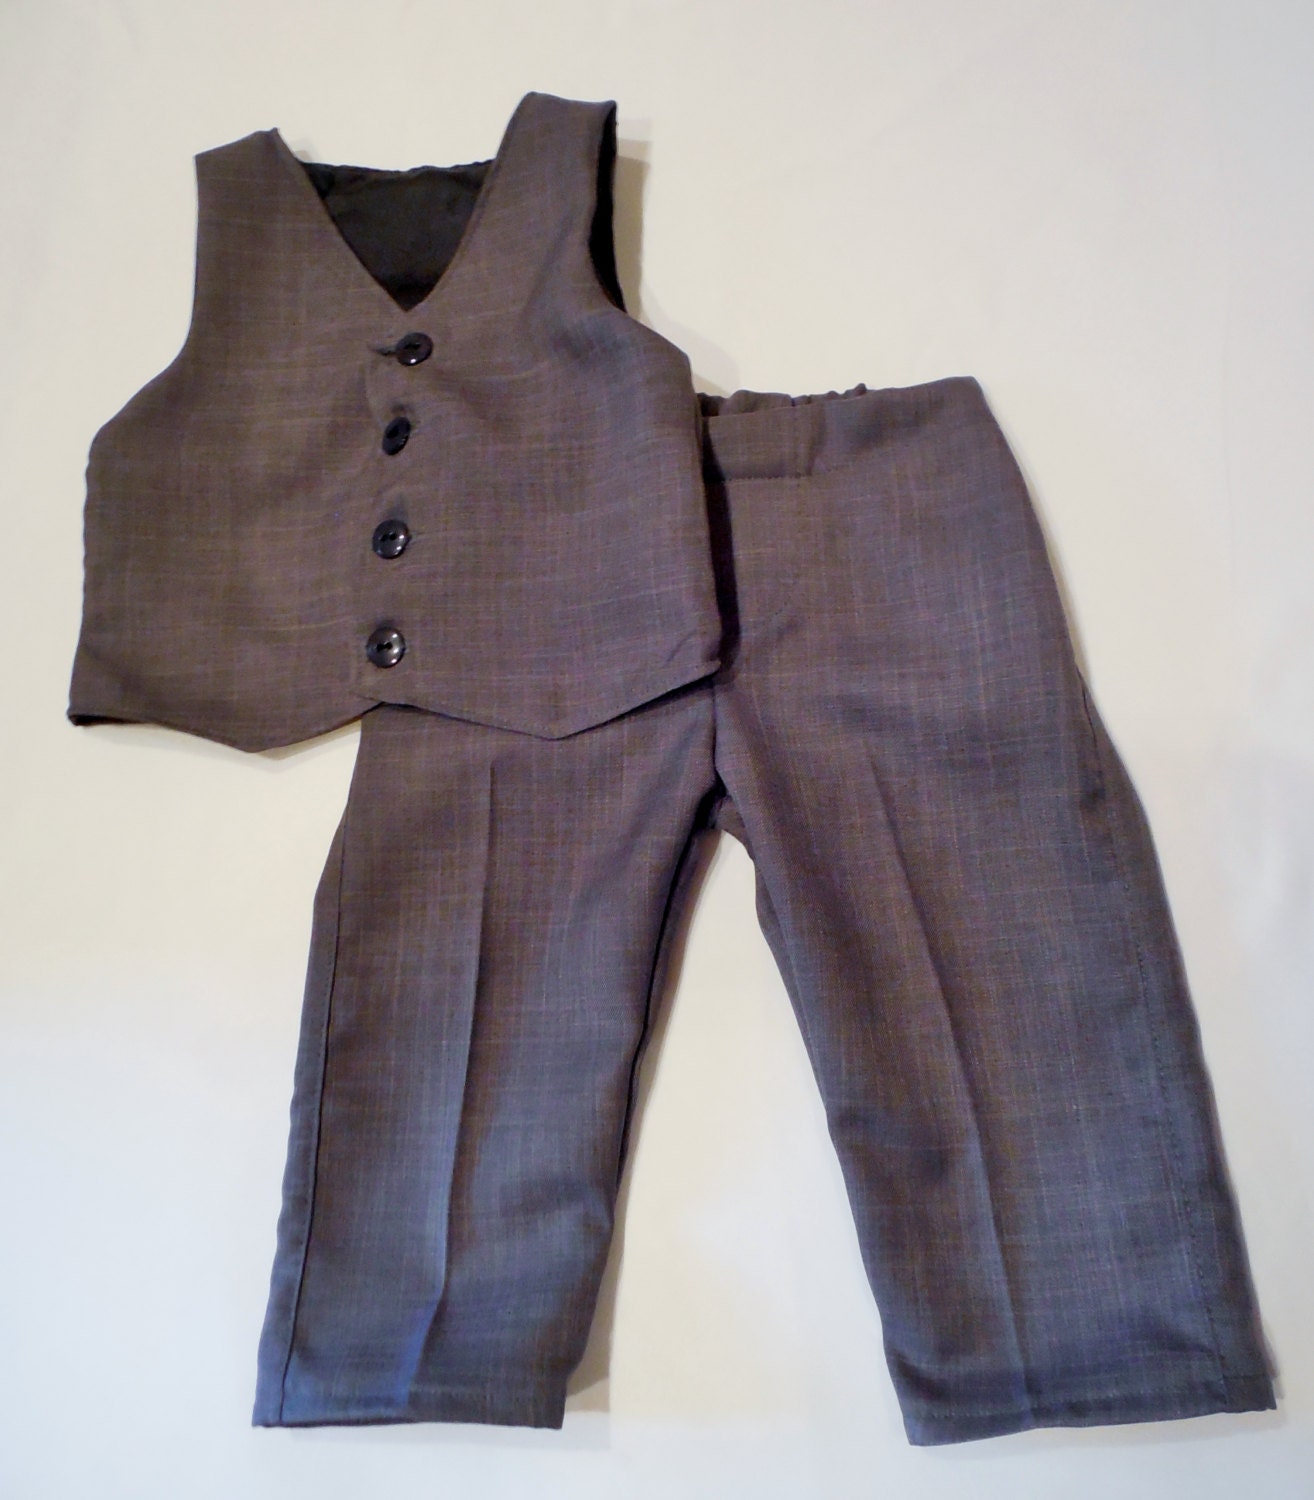 Gray Toddler suit with black lining. Boys suit in sizes 6-9